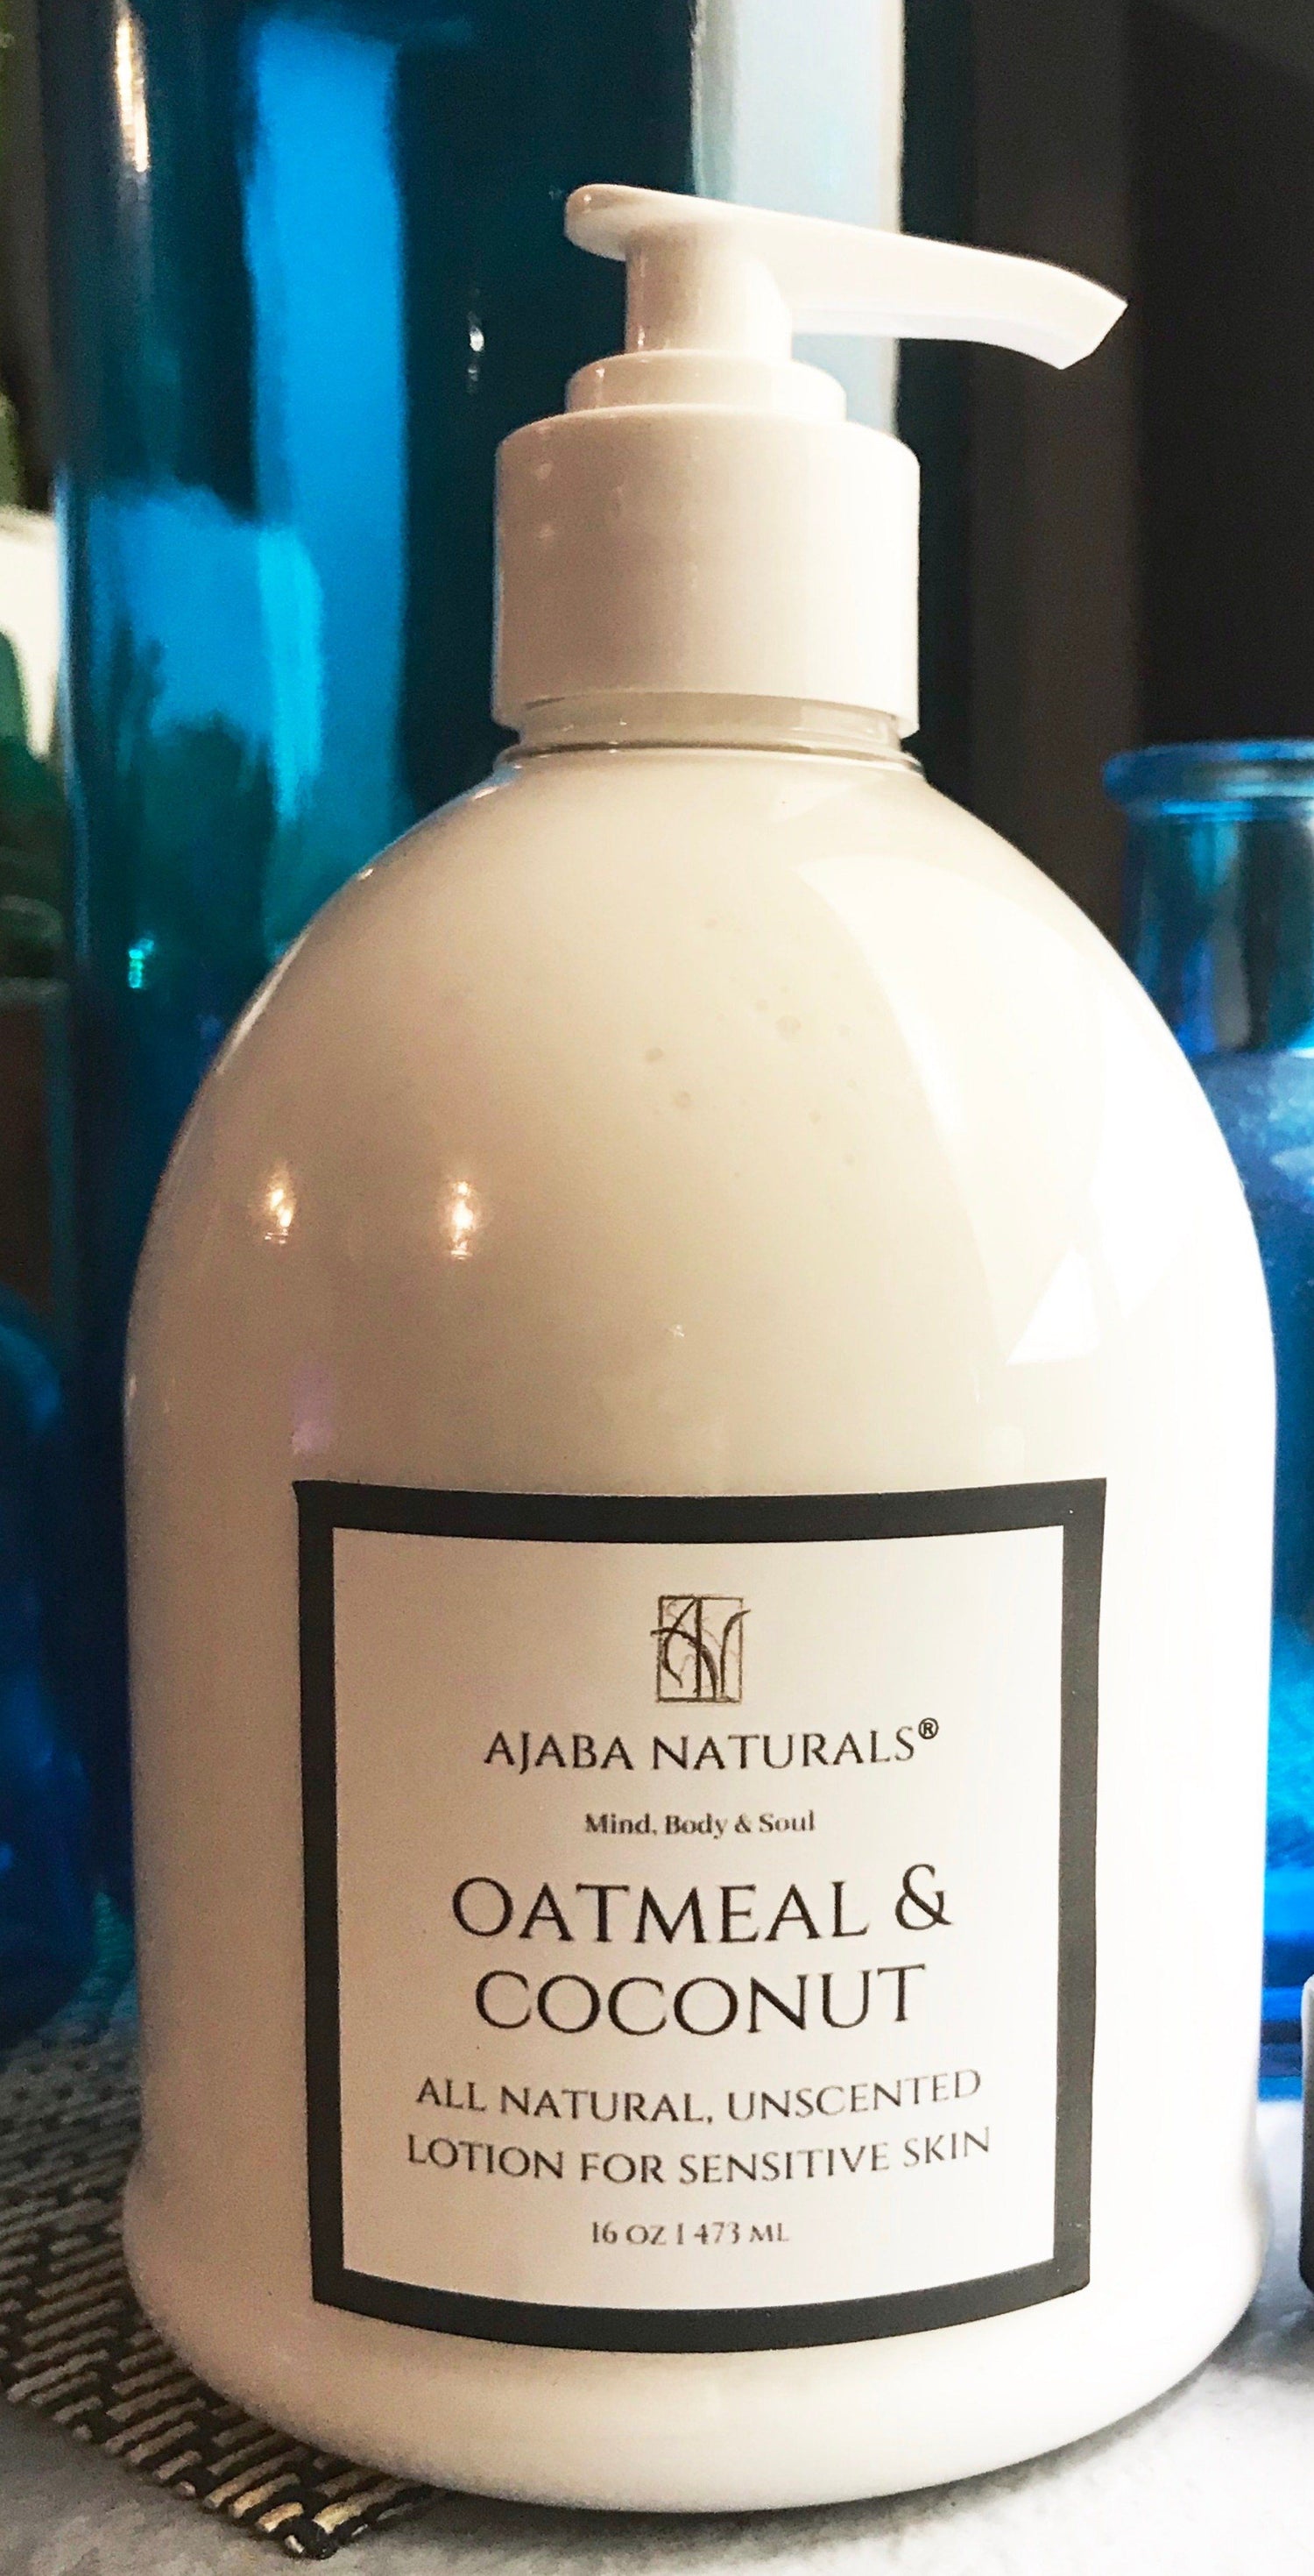 All Natural Oatmeal & Coconut Unscented Lotion for Sensitive Skin Lotion AJABA NATURALS™ 